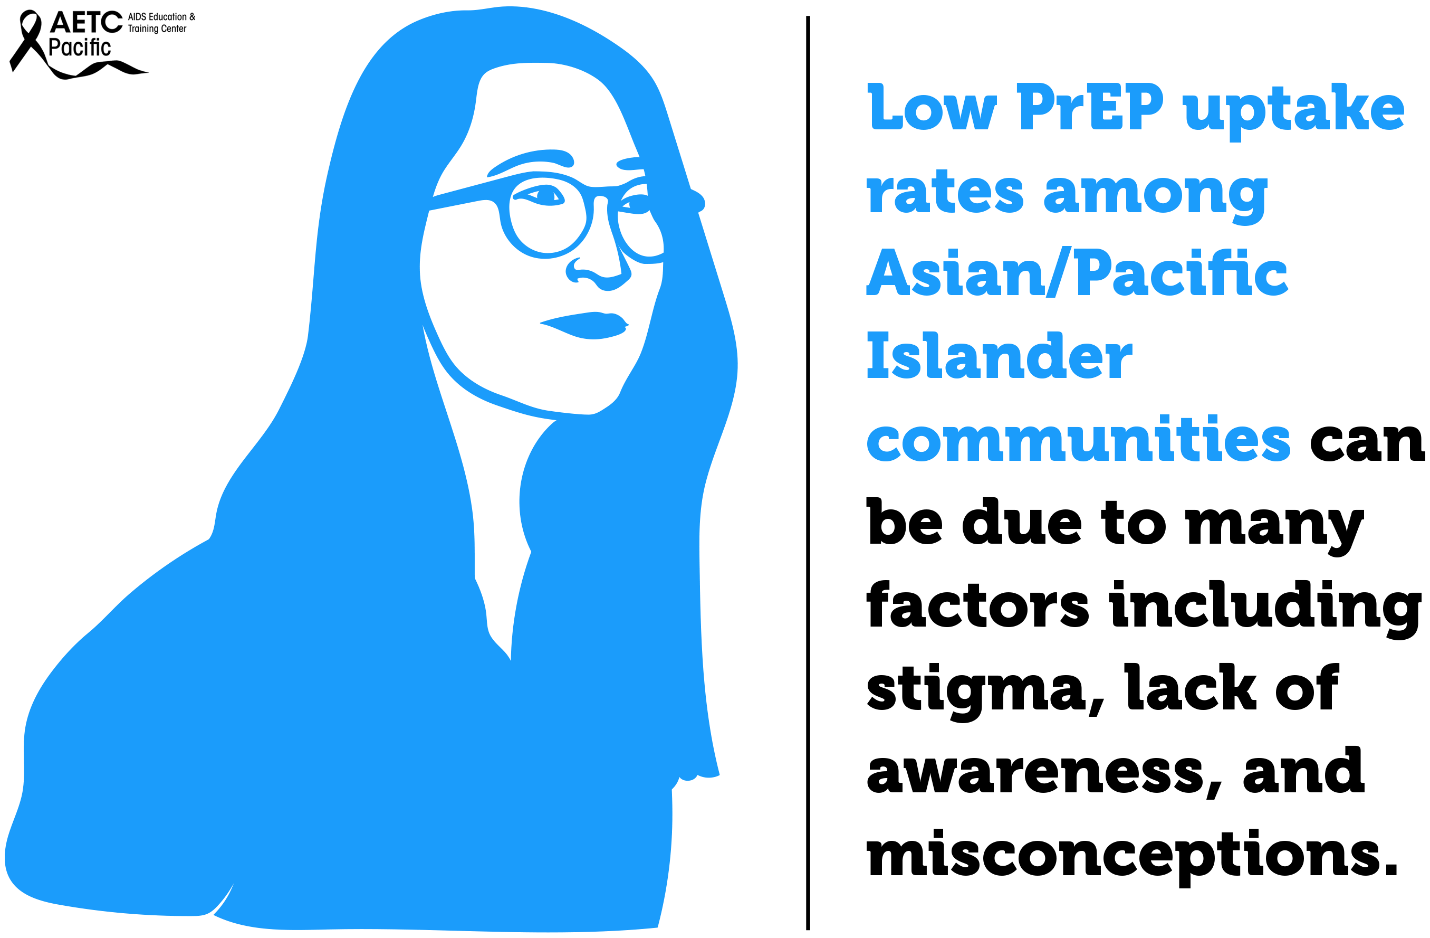 Low PrEP uptake rates among Asian/Pacific Islander communities can be due to many factors including stigma, lack of awarenes and msconceptions